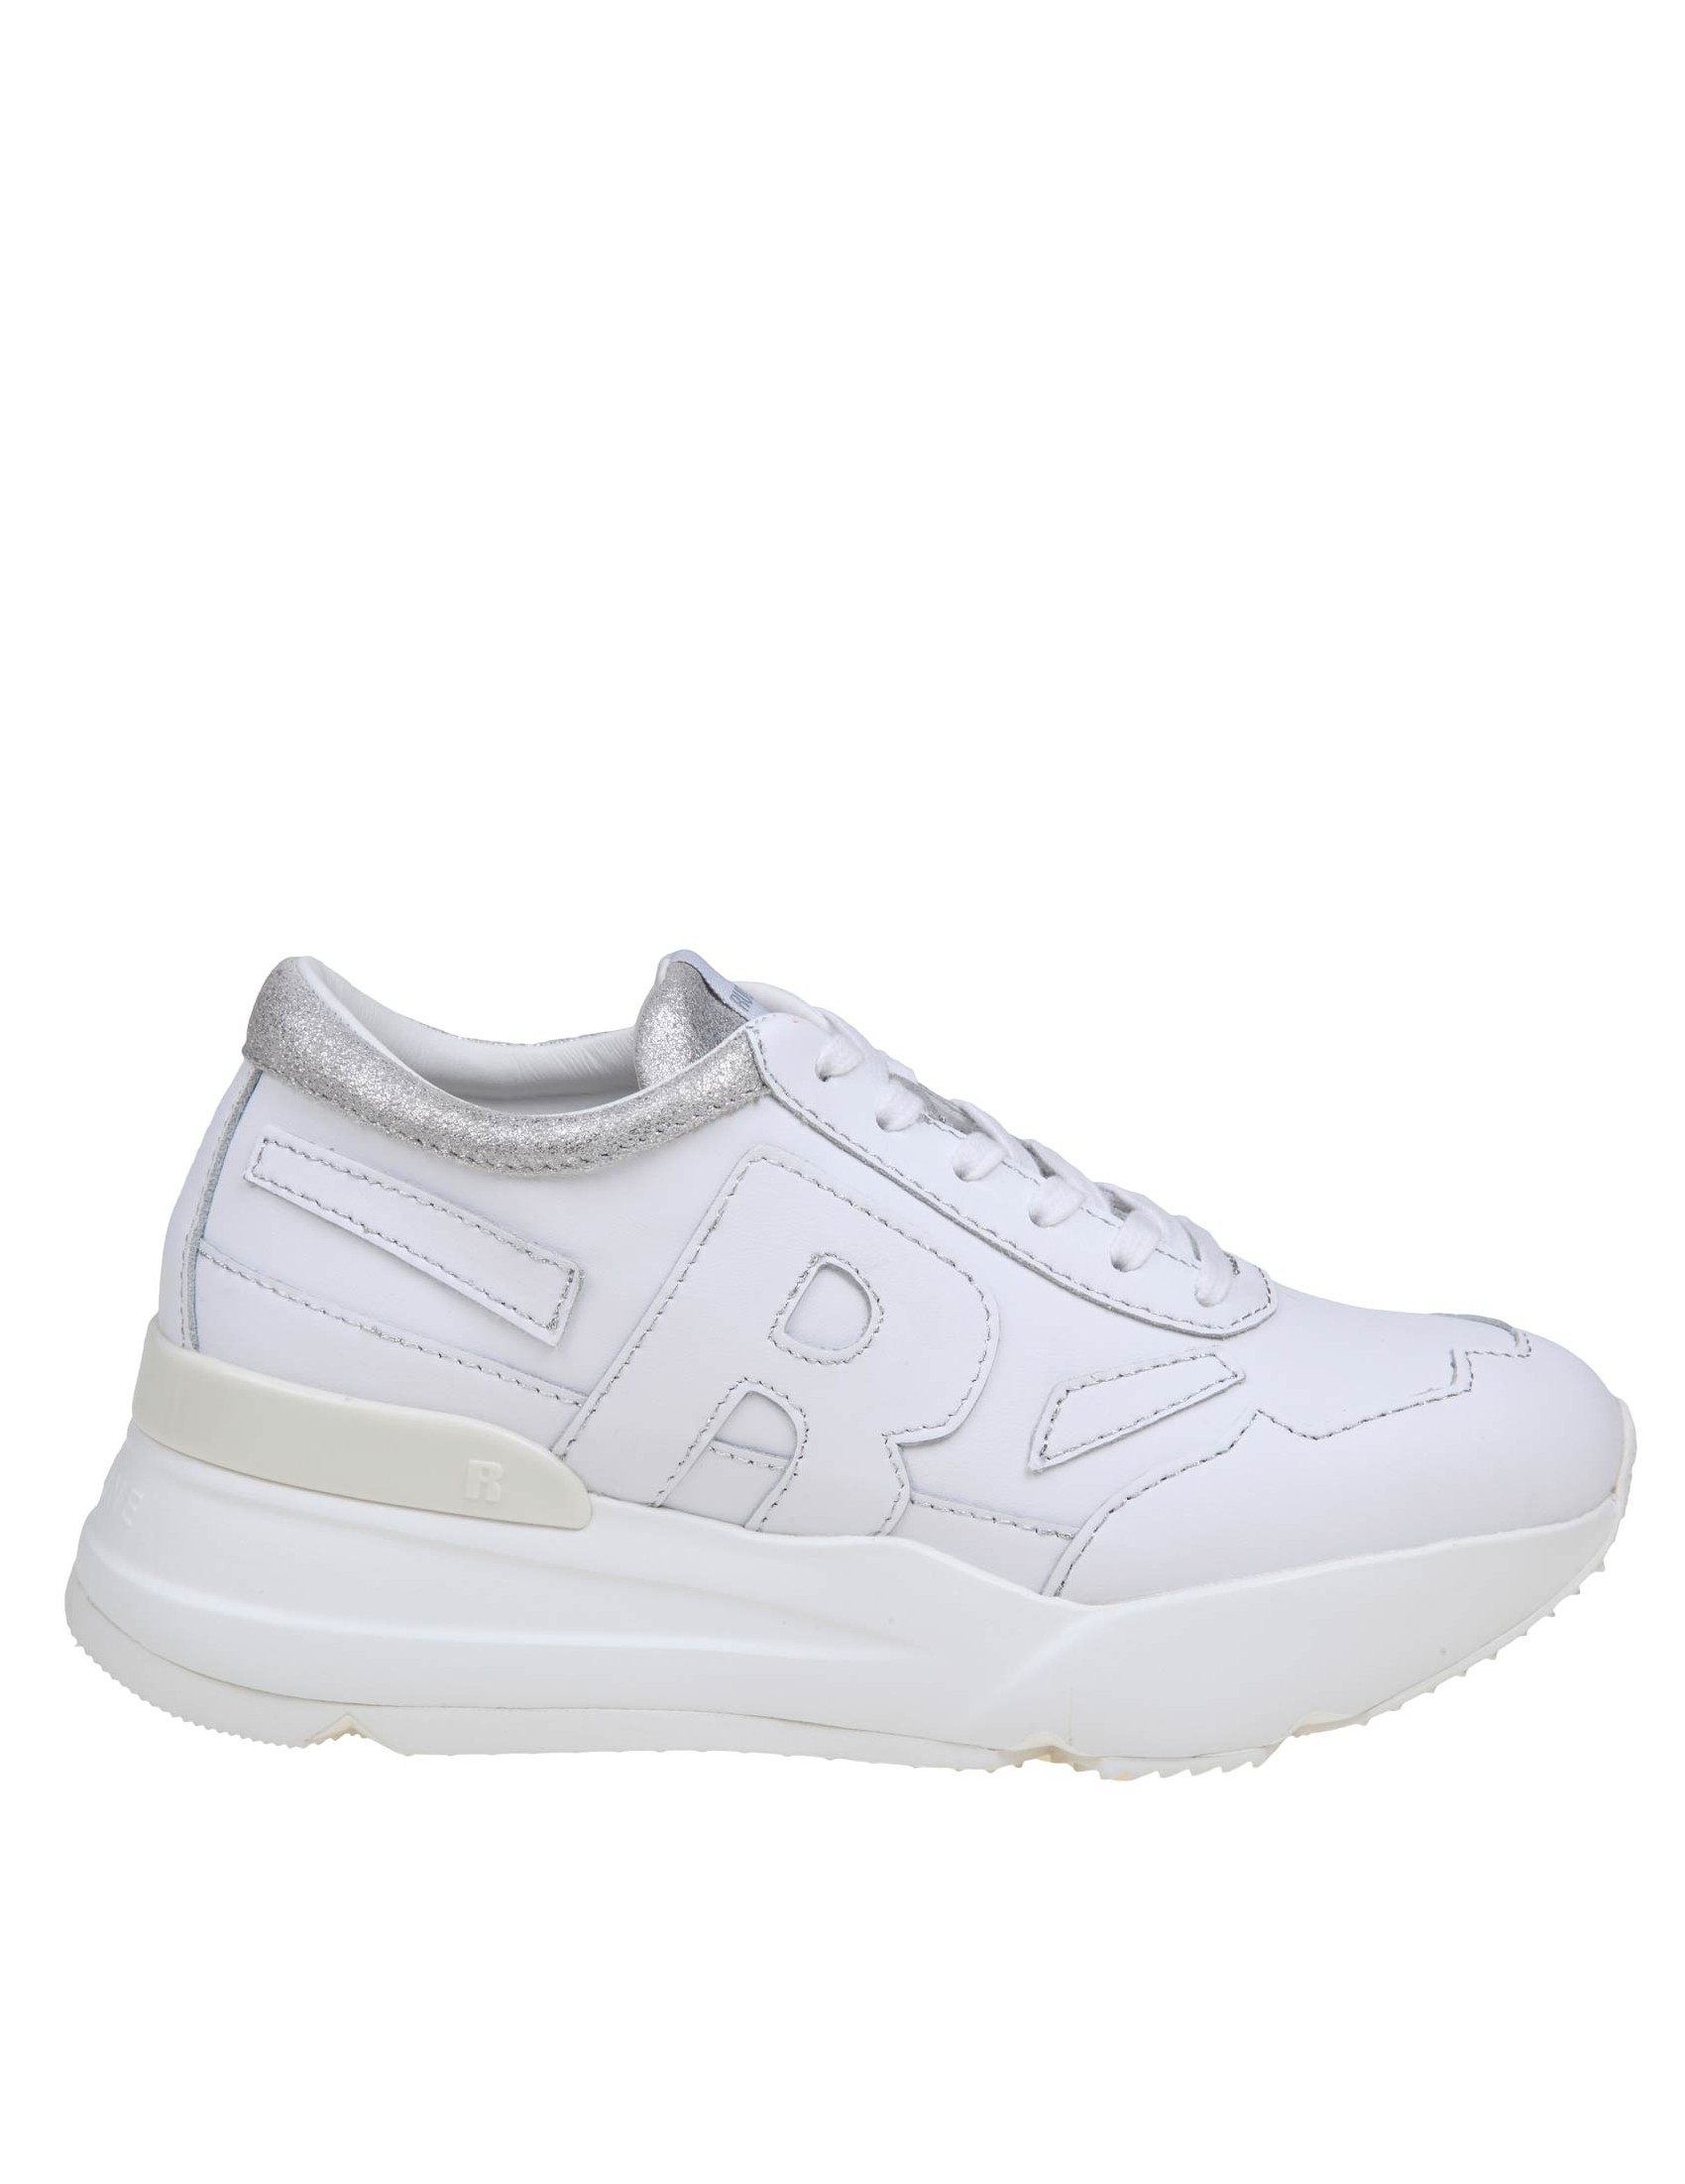 RUCOLINE WHITE LEATHER SNEAKERS